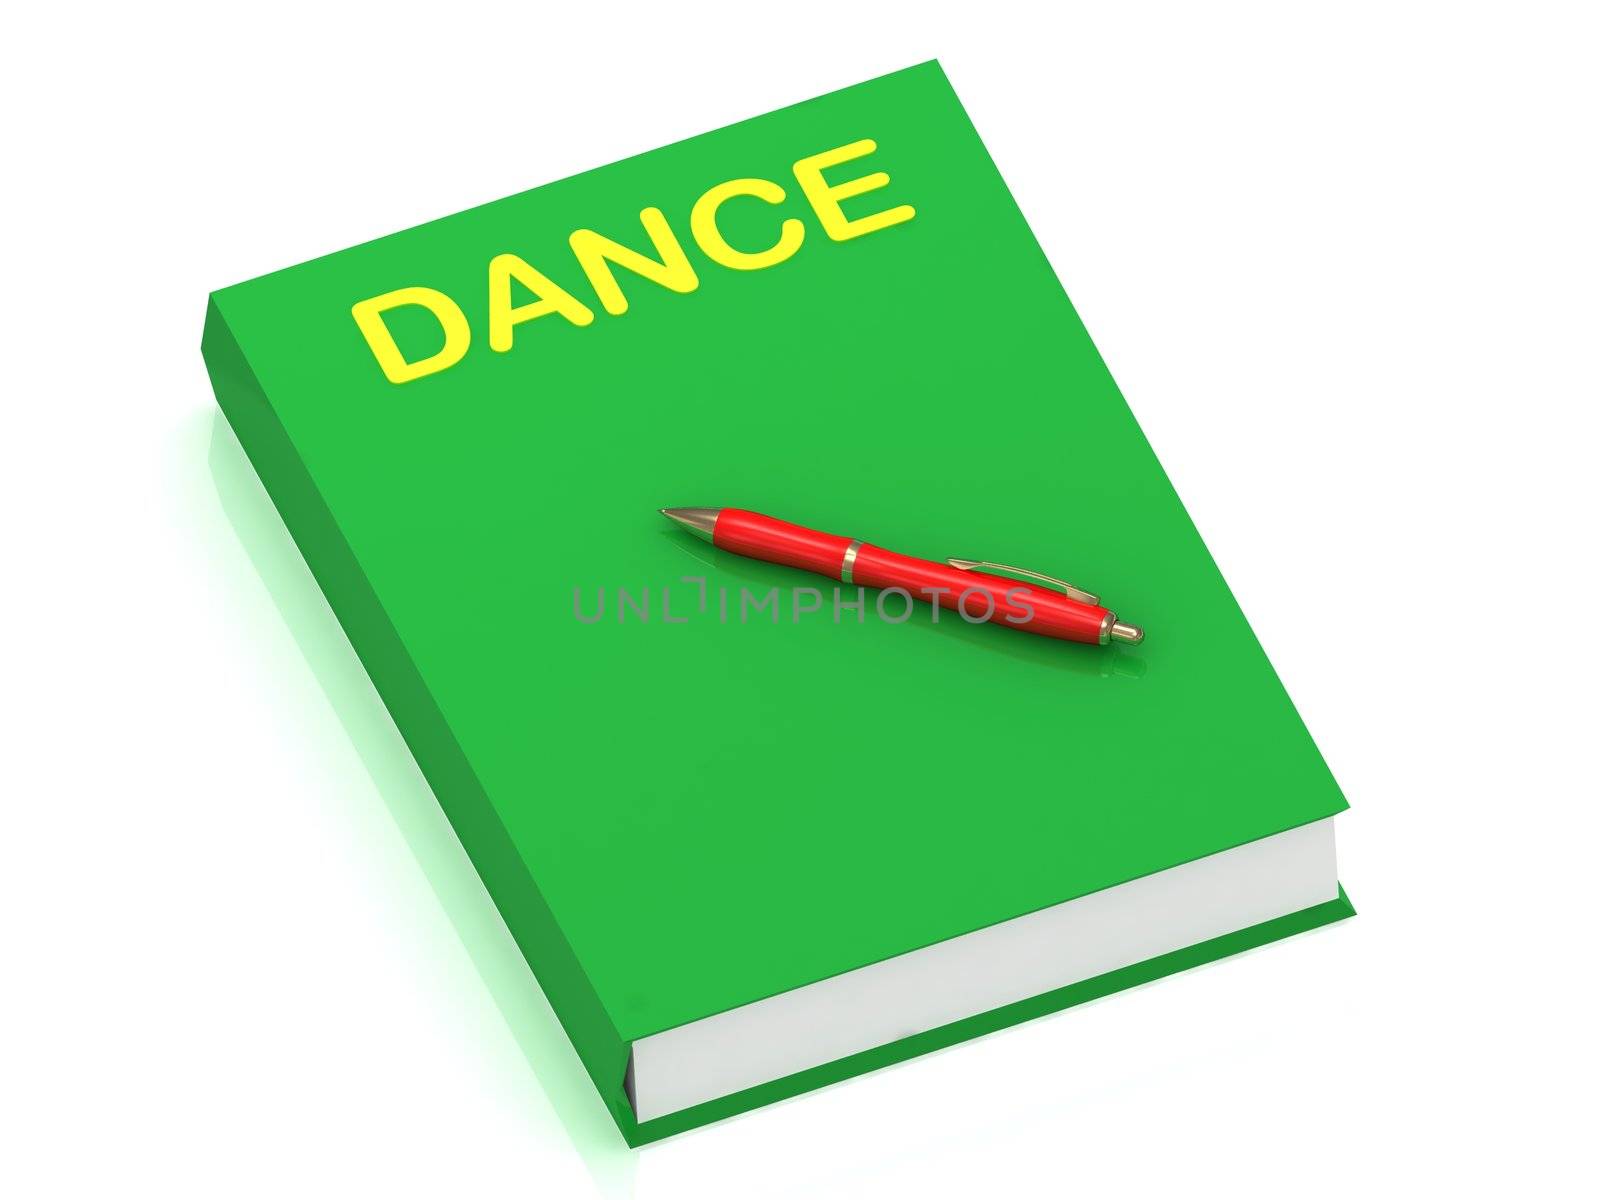 DANCE inscription on cover book and red pen on the book. 3D illustration isolated on white background